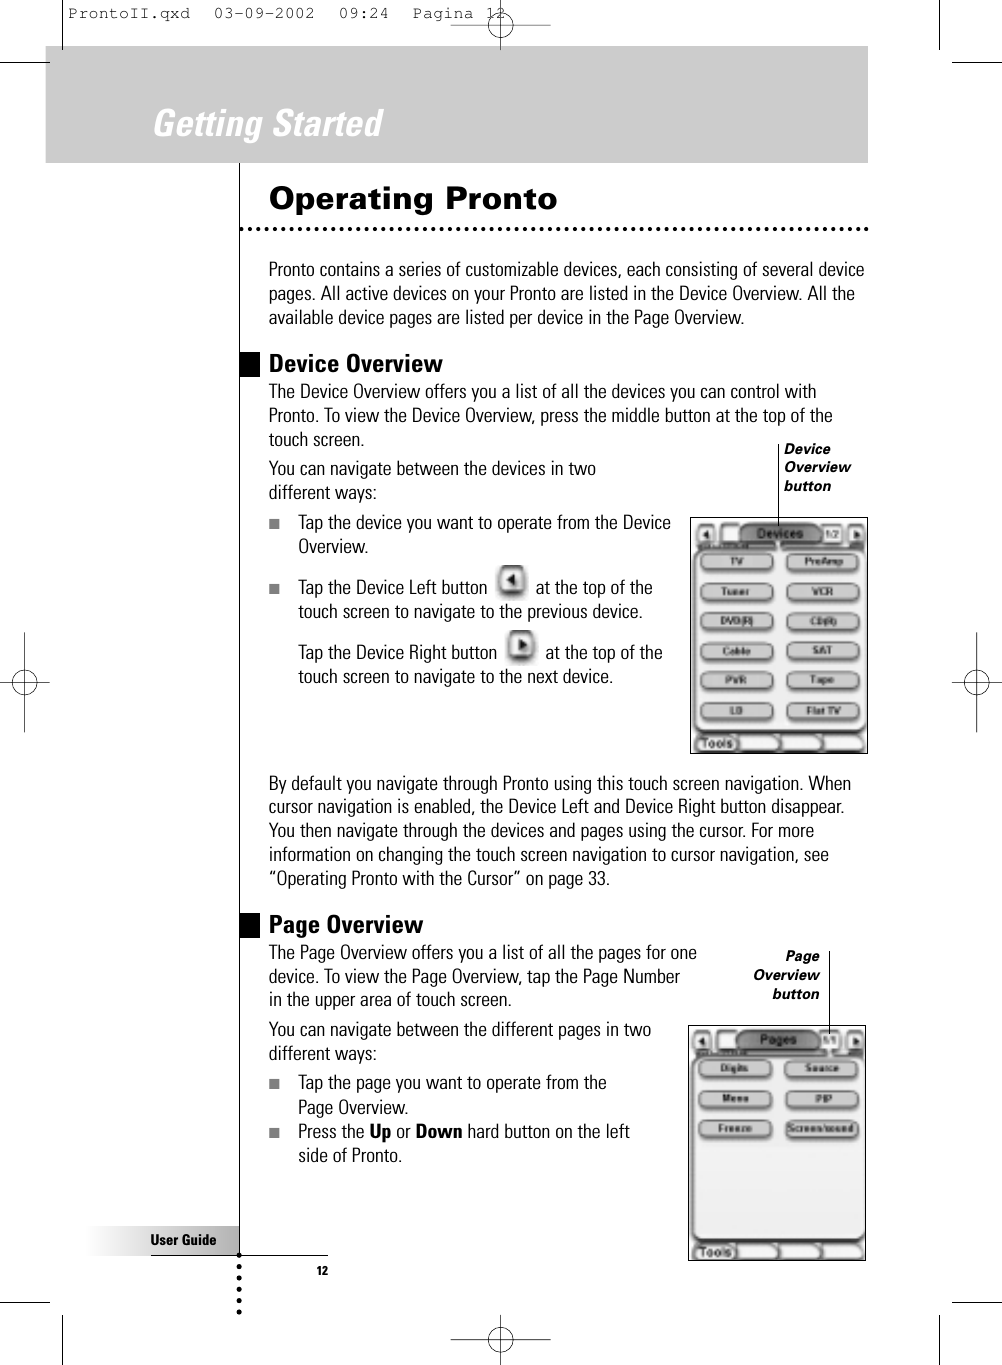 User Guide12Getting StartedOperating ProntoPronto contains a series of customizable devices, each consisting of several devicepages. All active devices on your Pronto are listed in the Device Overview. All theavailable device pages are listed per device in the Page Overview.Device OverviewThe Device Overview offers you a list of all the devices you can control withPronto. To view the Device Overview, press the middle button at the top of thetouch screen.You can navigate between the devices in two different ways:■Tap the device you want to operate from the Device Overview.■Tap the Device Left button  at the top of the touch screen to navigate to the previous device.Tap the Device Right button  at the top of the touch screen to navigate to the next device.By default you navigate through Pronto using this touch screen navigation. Whencursor navigation is enabled, the Device Left and Device Right button disappear.You then navigate through the devices and pages using the cursor. For moreinformation on changing the touch screen navigation to cursor navigation, see“Operating Pronto with the Cursor” on page 33.Page OverviewThe Page Overview offers you a list of all the pages for one device. To view the Page Overview, tap the Page Number in the upper area of touch screen.You can navigate between the different pages in two different ways:■Tap the page you want to operate from the Page Overview.■Press the Up or Down hard button on the left side of Pronto.DeviceOverviewbuttonPageOverviewbuttonProntoII.qxd  03-09-2002  09:24  Pagina 12